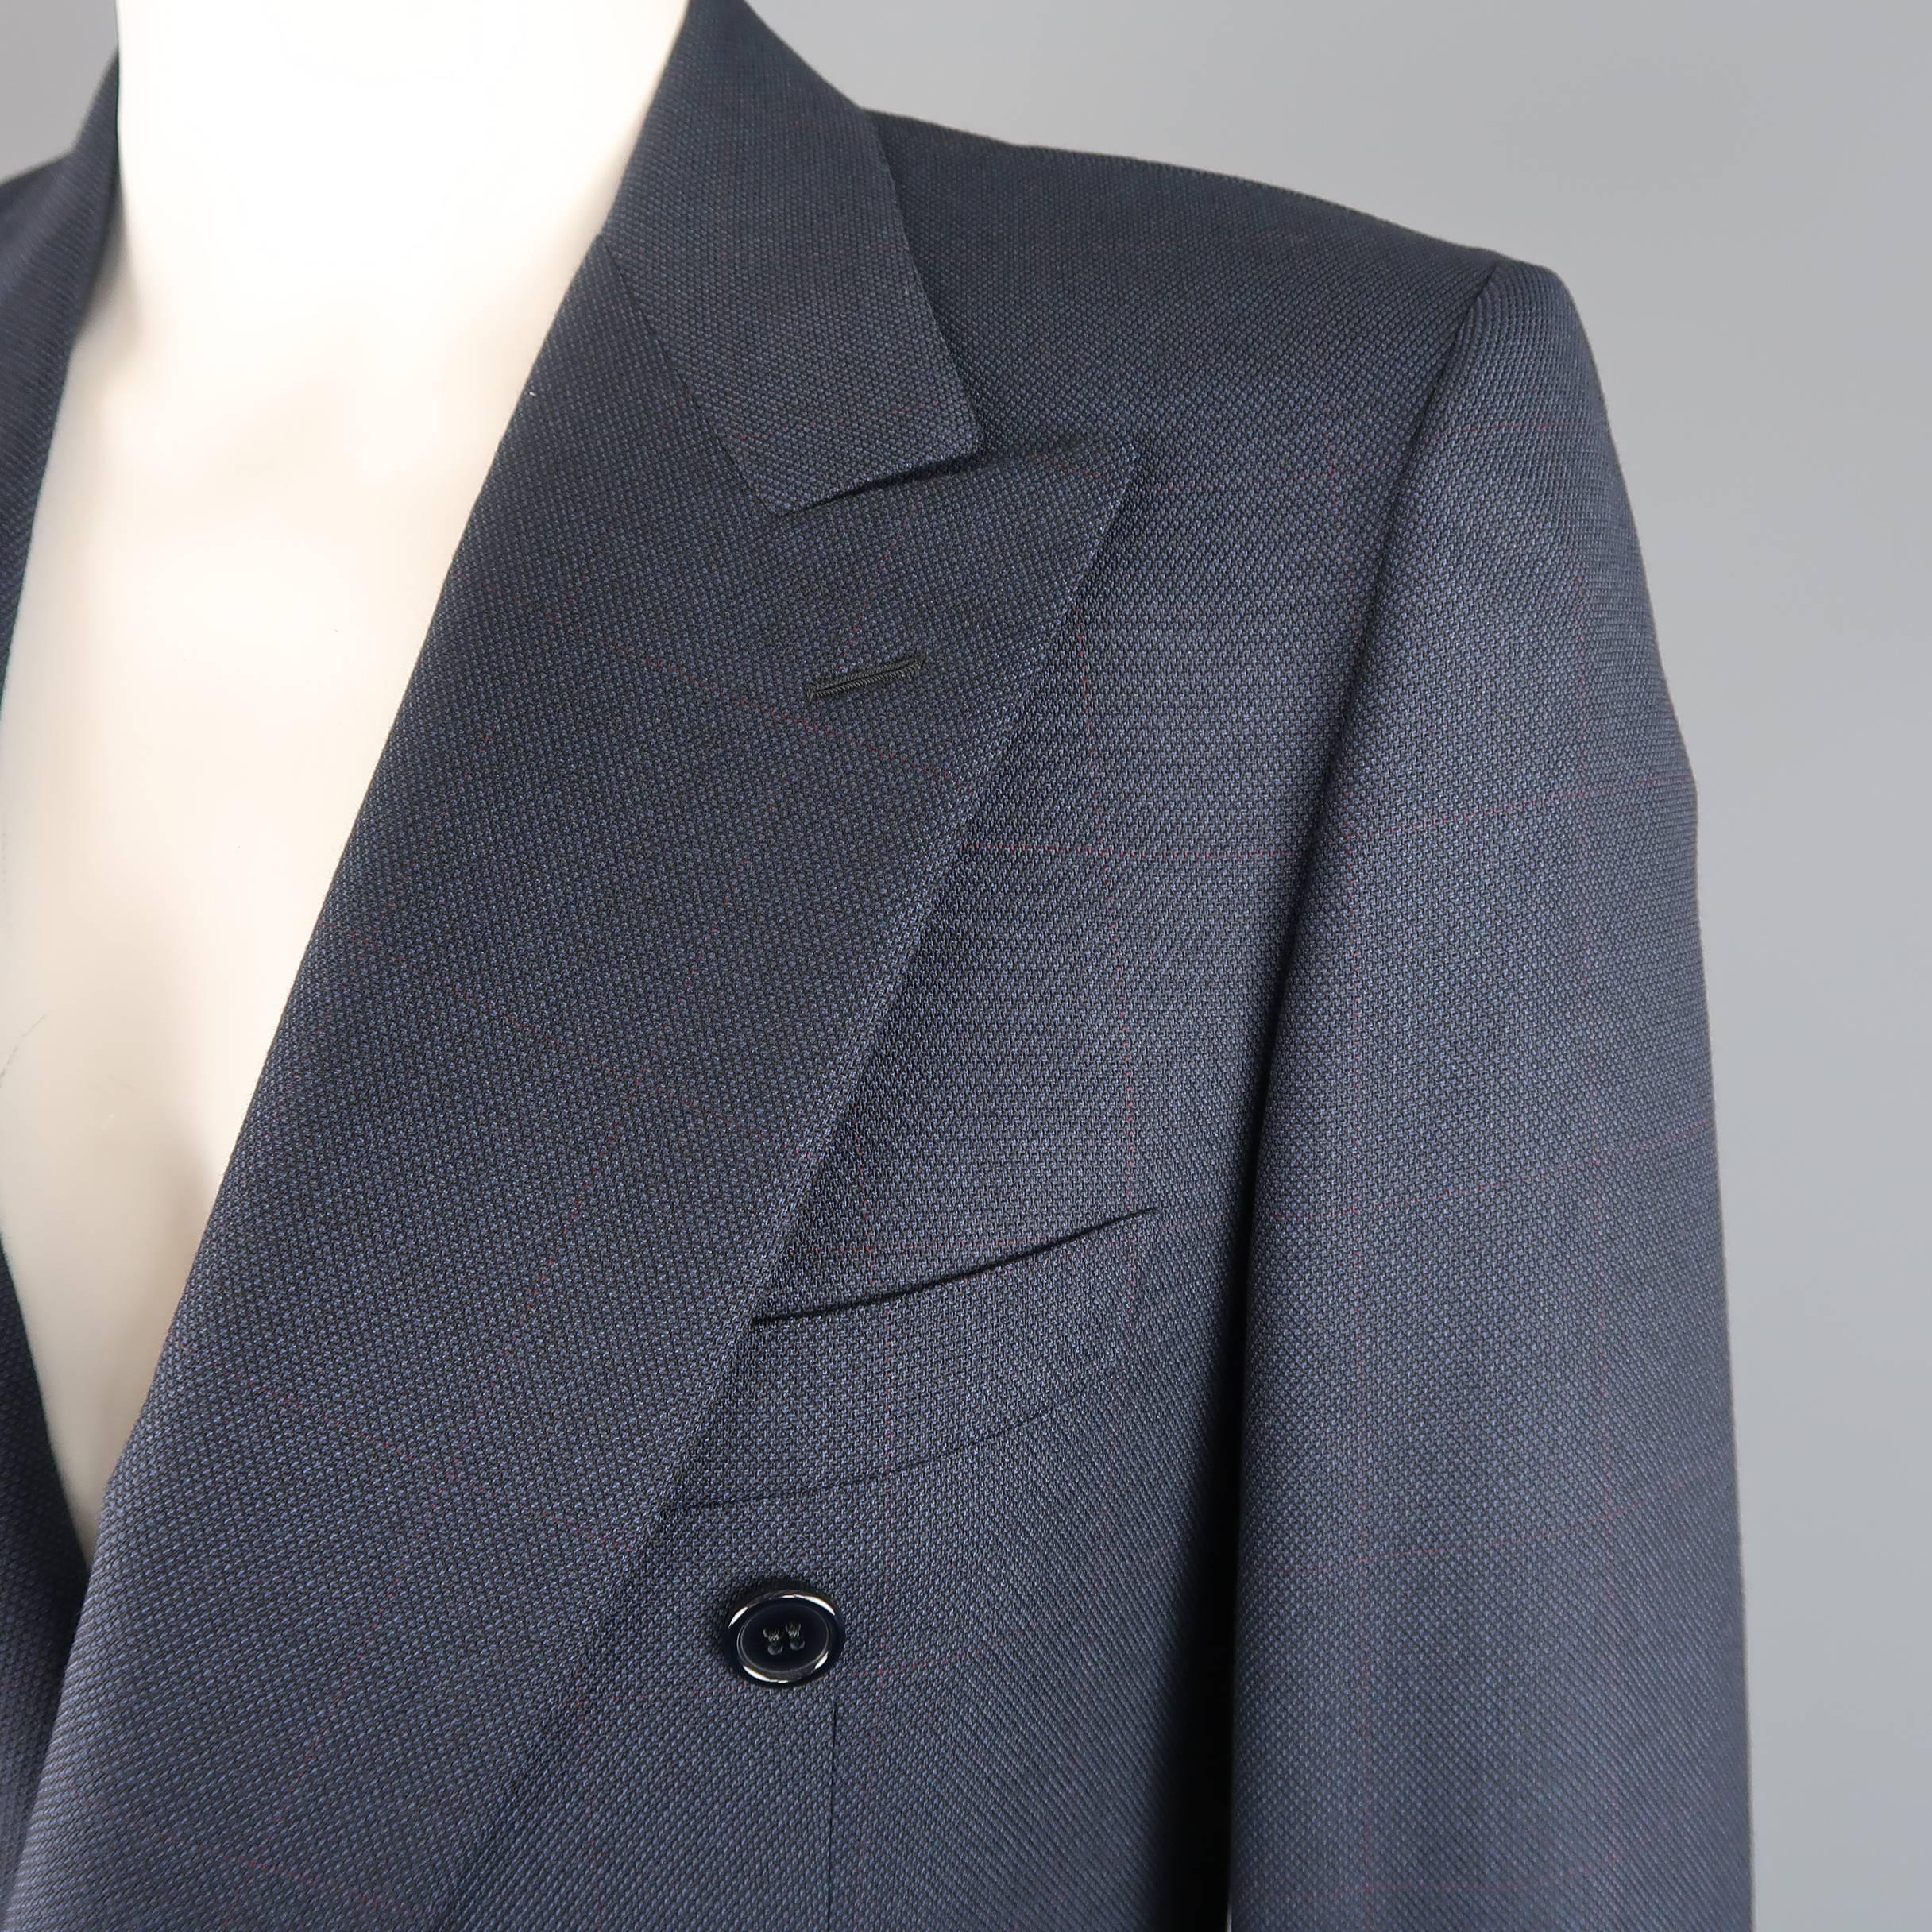 
Vintage double breasted BRIONI sport coat comes in navy textured wool fabric with a subtle red windowpane pattern throughout, single button closure, and wide peak lapel. Made in Italy.
 
Excellent Pre-Owned Condition.
Marked: 40 L
 
Measurements:
 